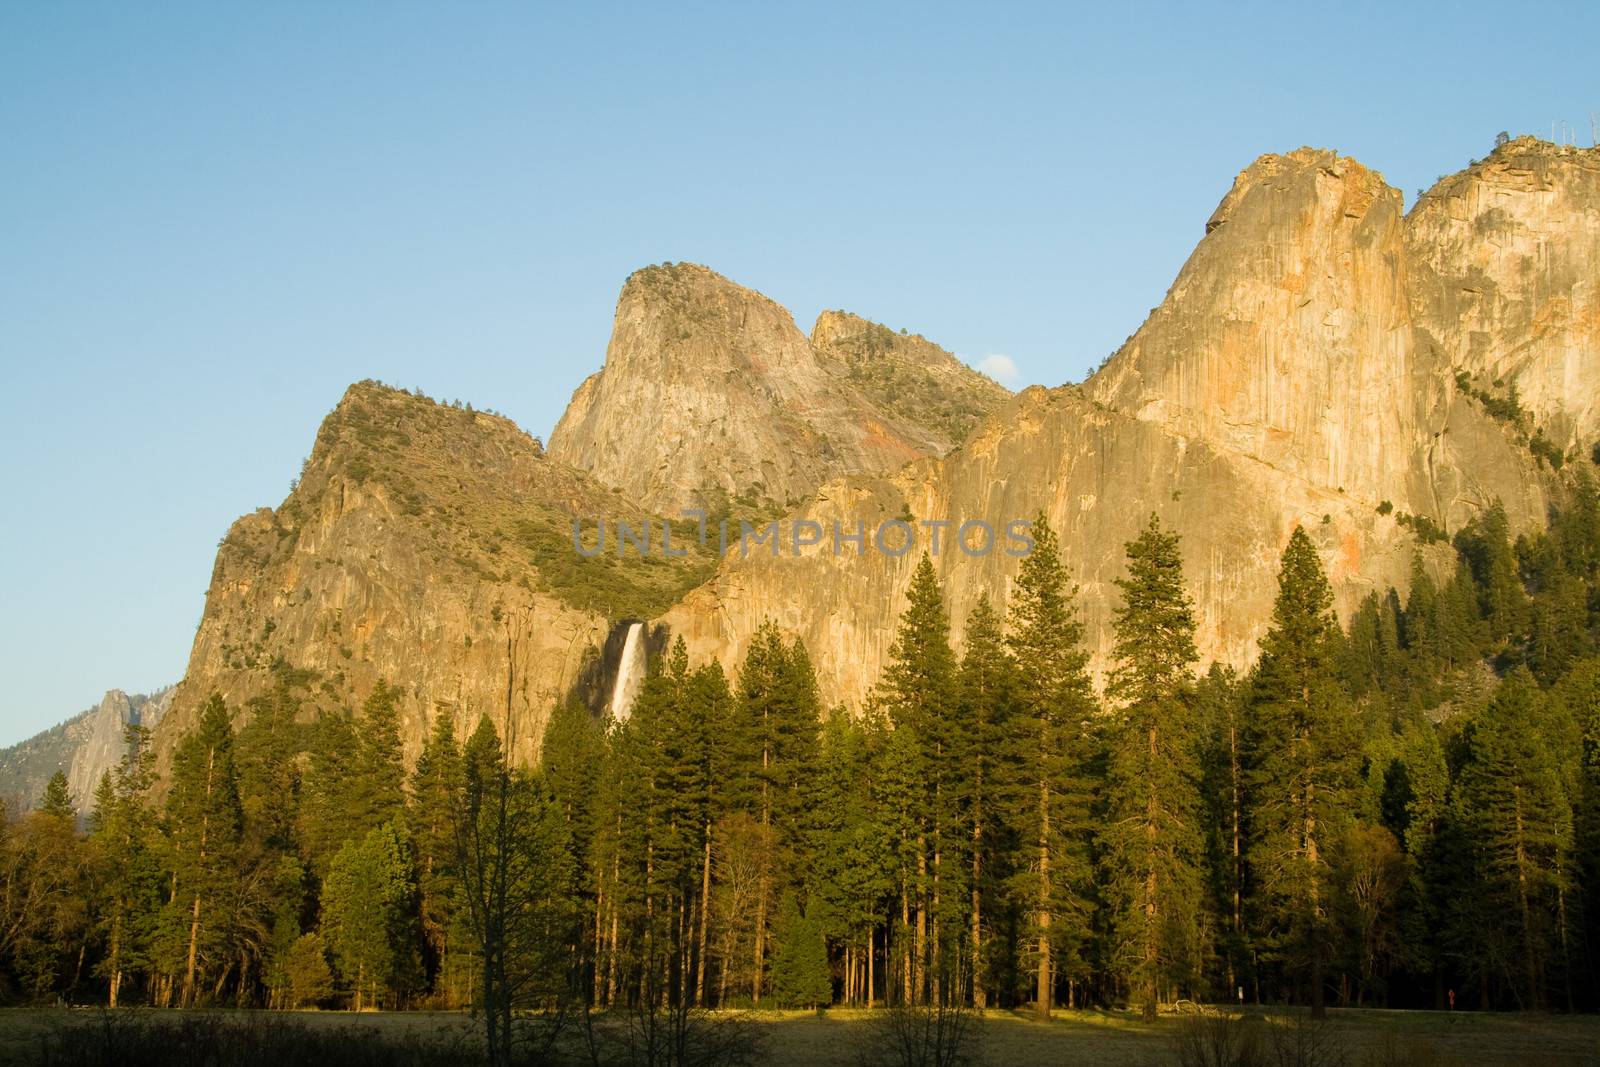 Trees in a forest with mountain in the background, Bridal Veil Falls, Yosemite Valley, Yosemite National Park, California, USA